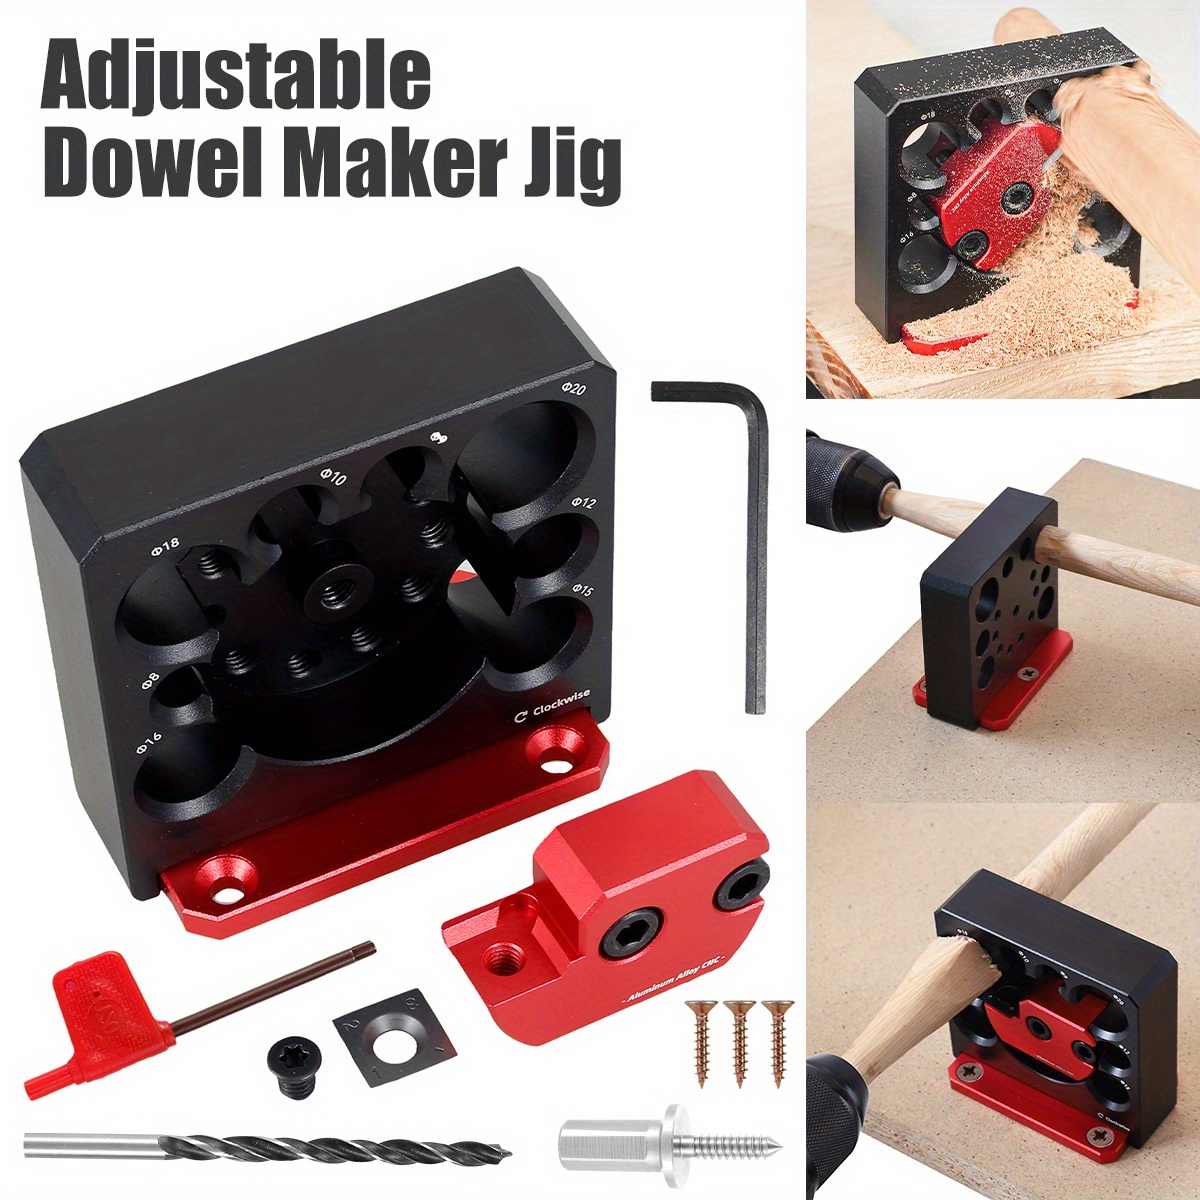 Efficient High-Speed Dowel Maker with Replaceable Carbide Inserts |  Aluminum Alloy Dower Cutter | 8 Metric Size Holes | Ideal for Dowel  Woodworking